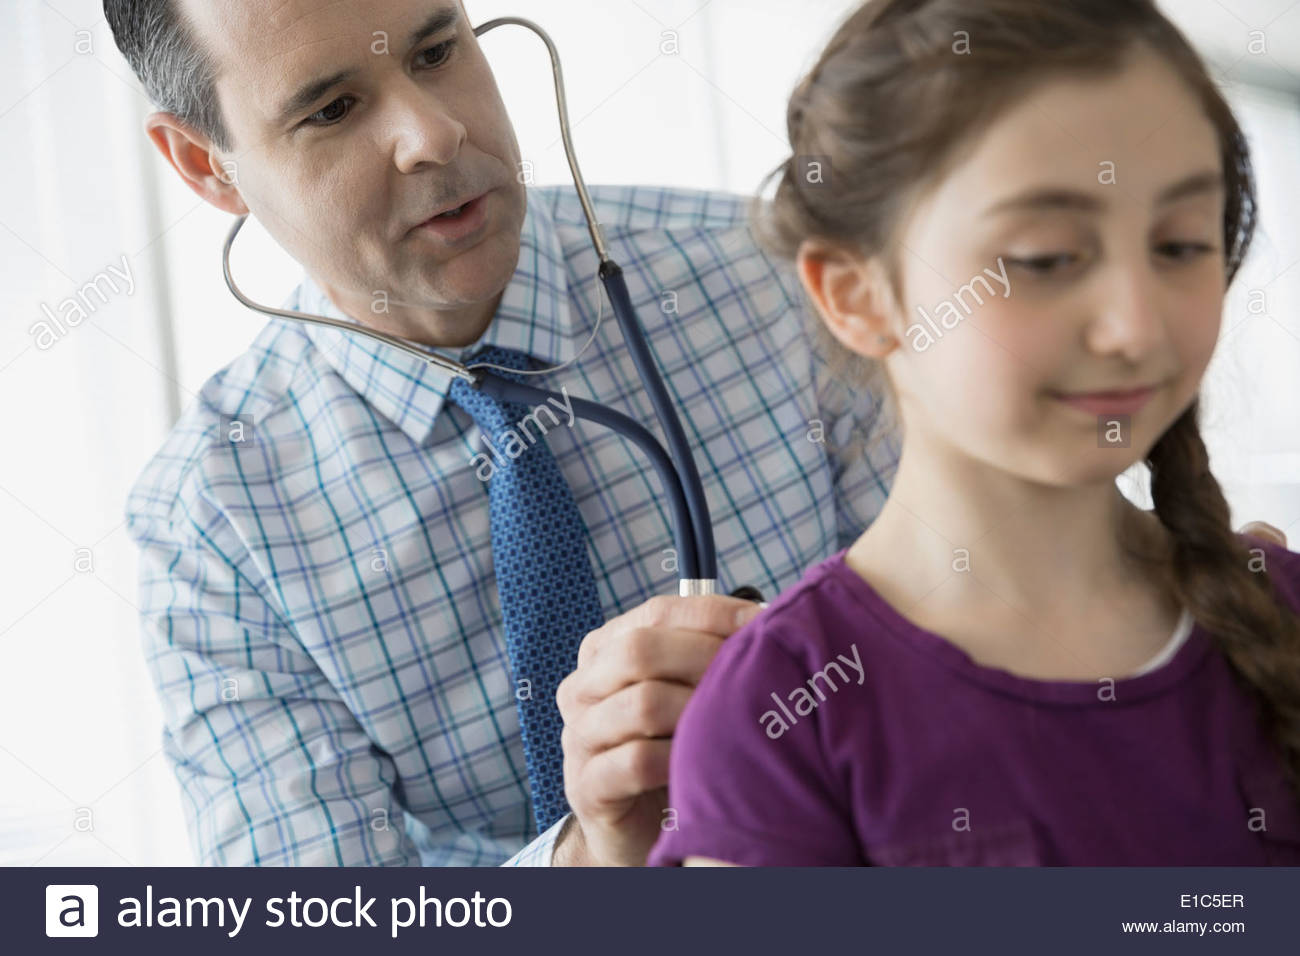 Pediatrician checking patientÕs breathing with stethoscope Stock Photo